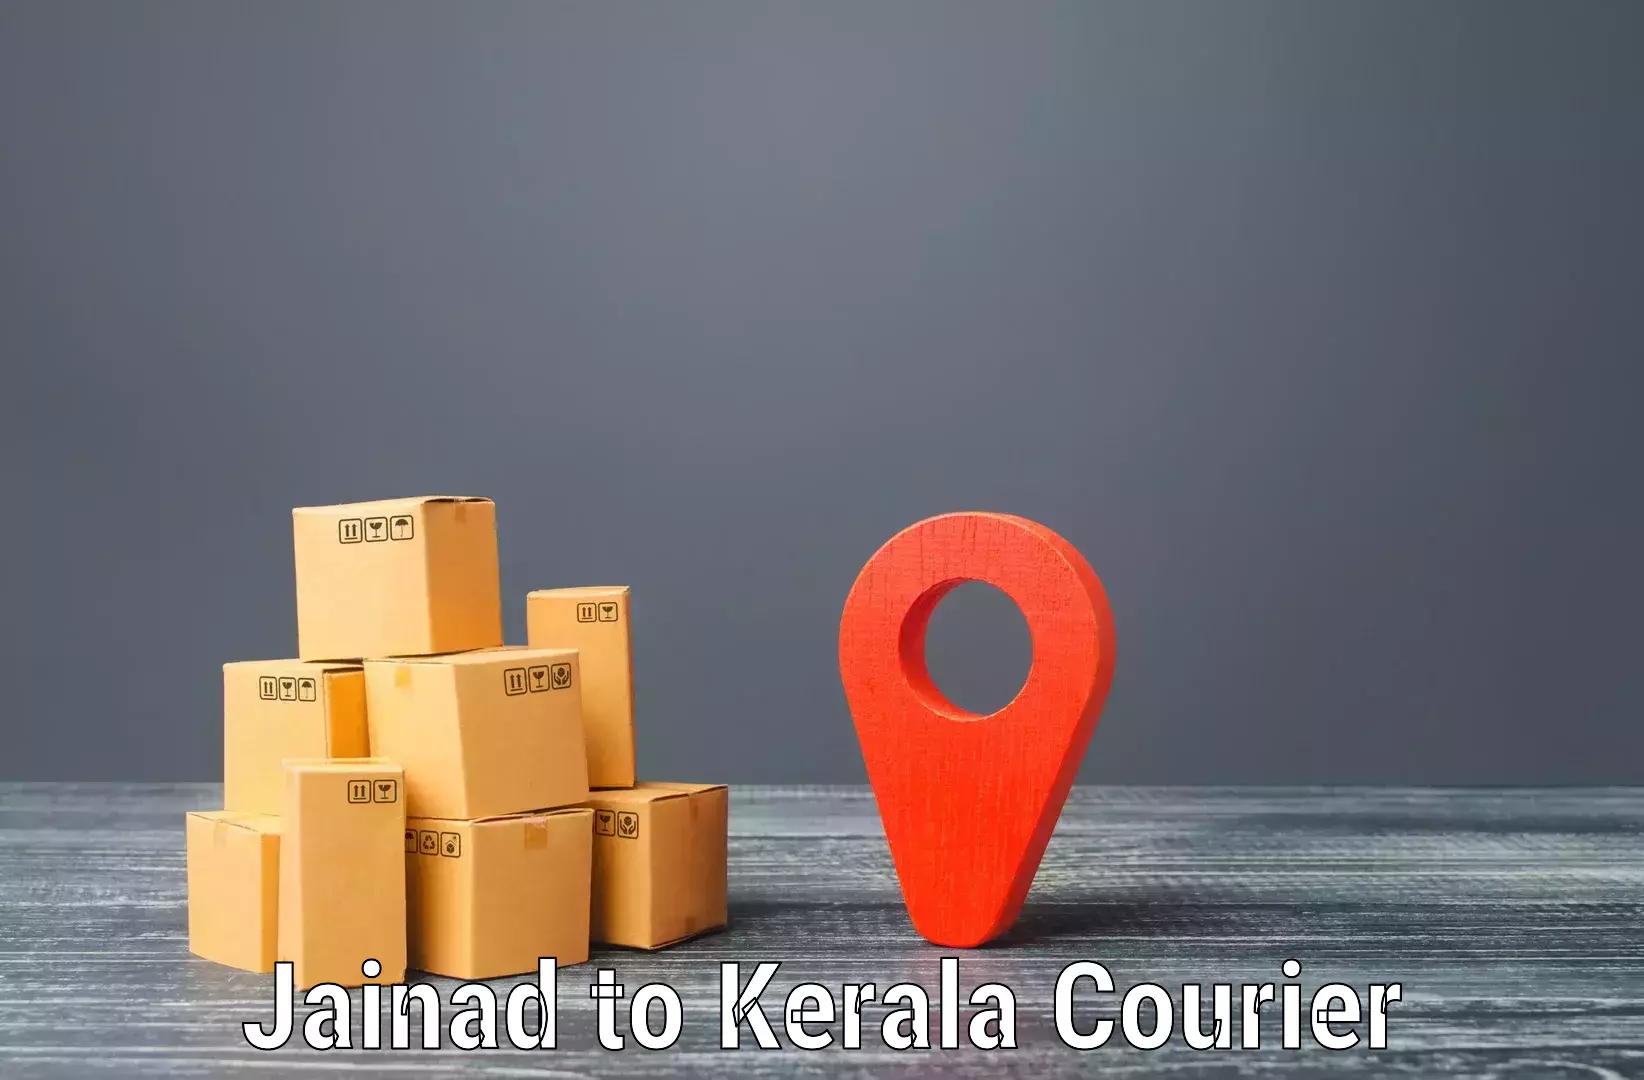 Comprehensive delivery network Jainad to Cochin